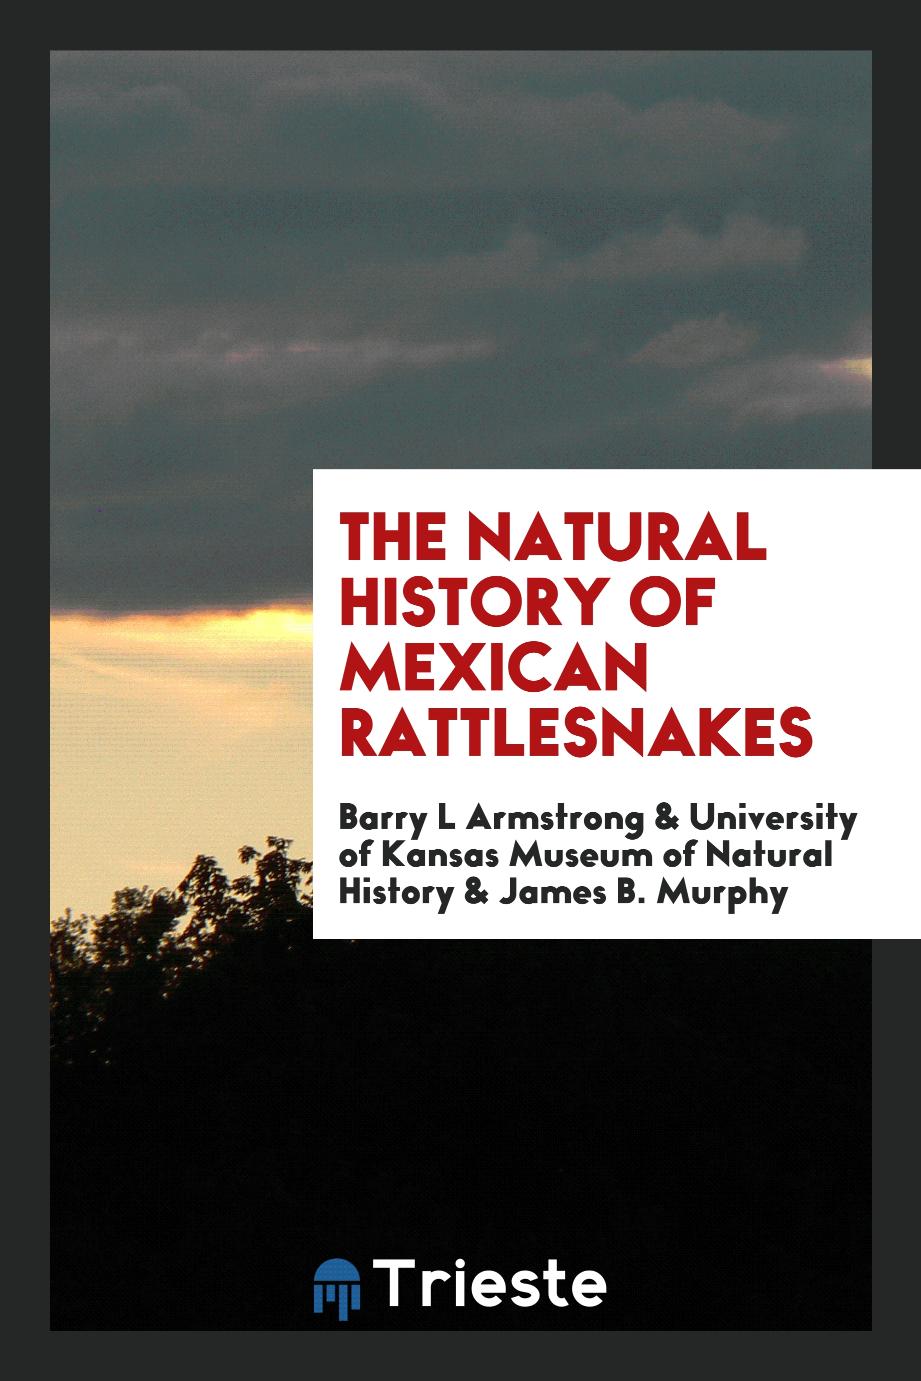 The natural history of Mexican rattlesnakes